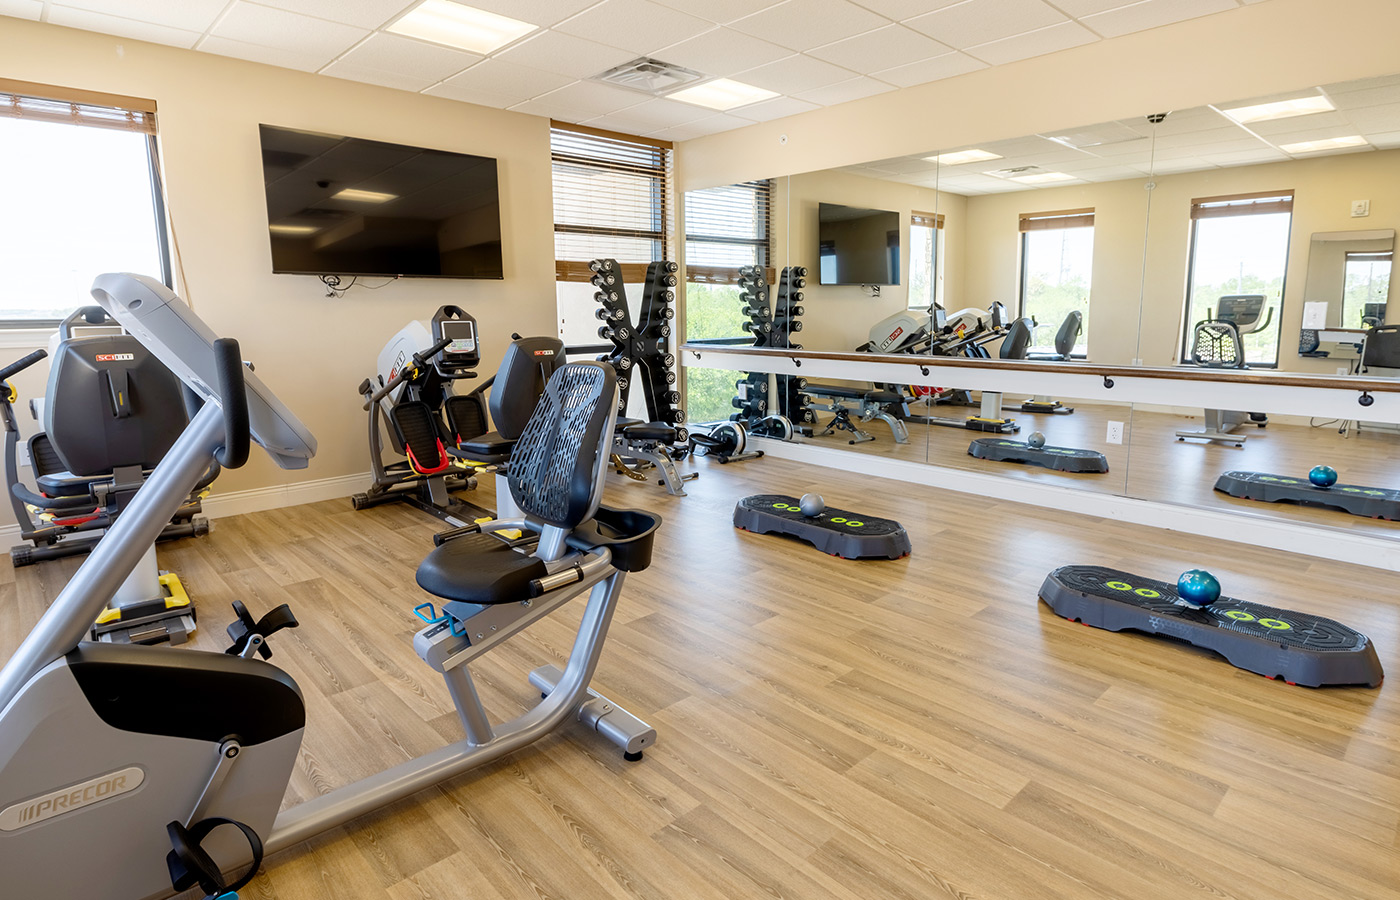 A fitness room with exercise equipment.